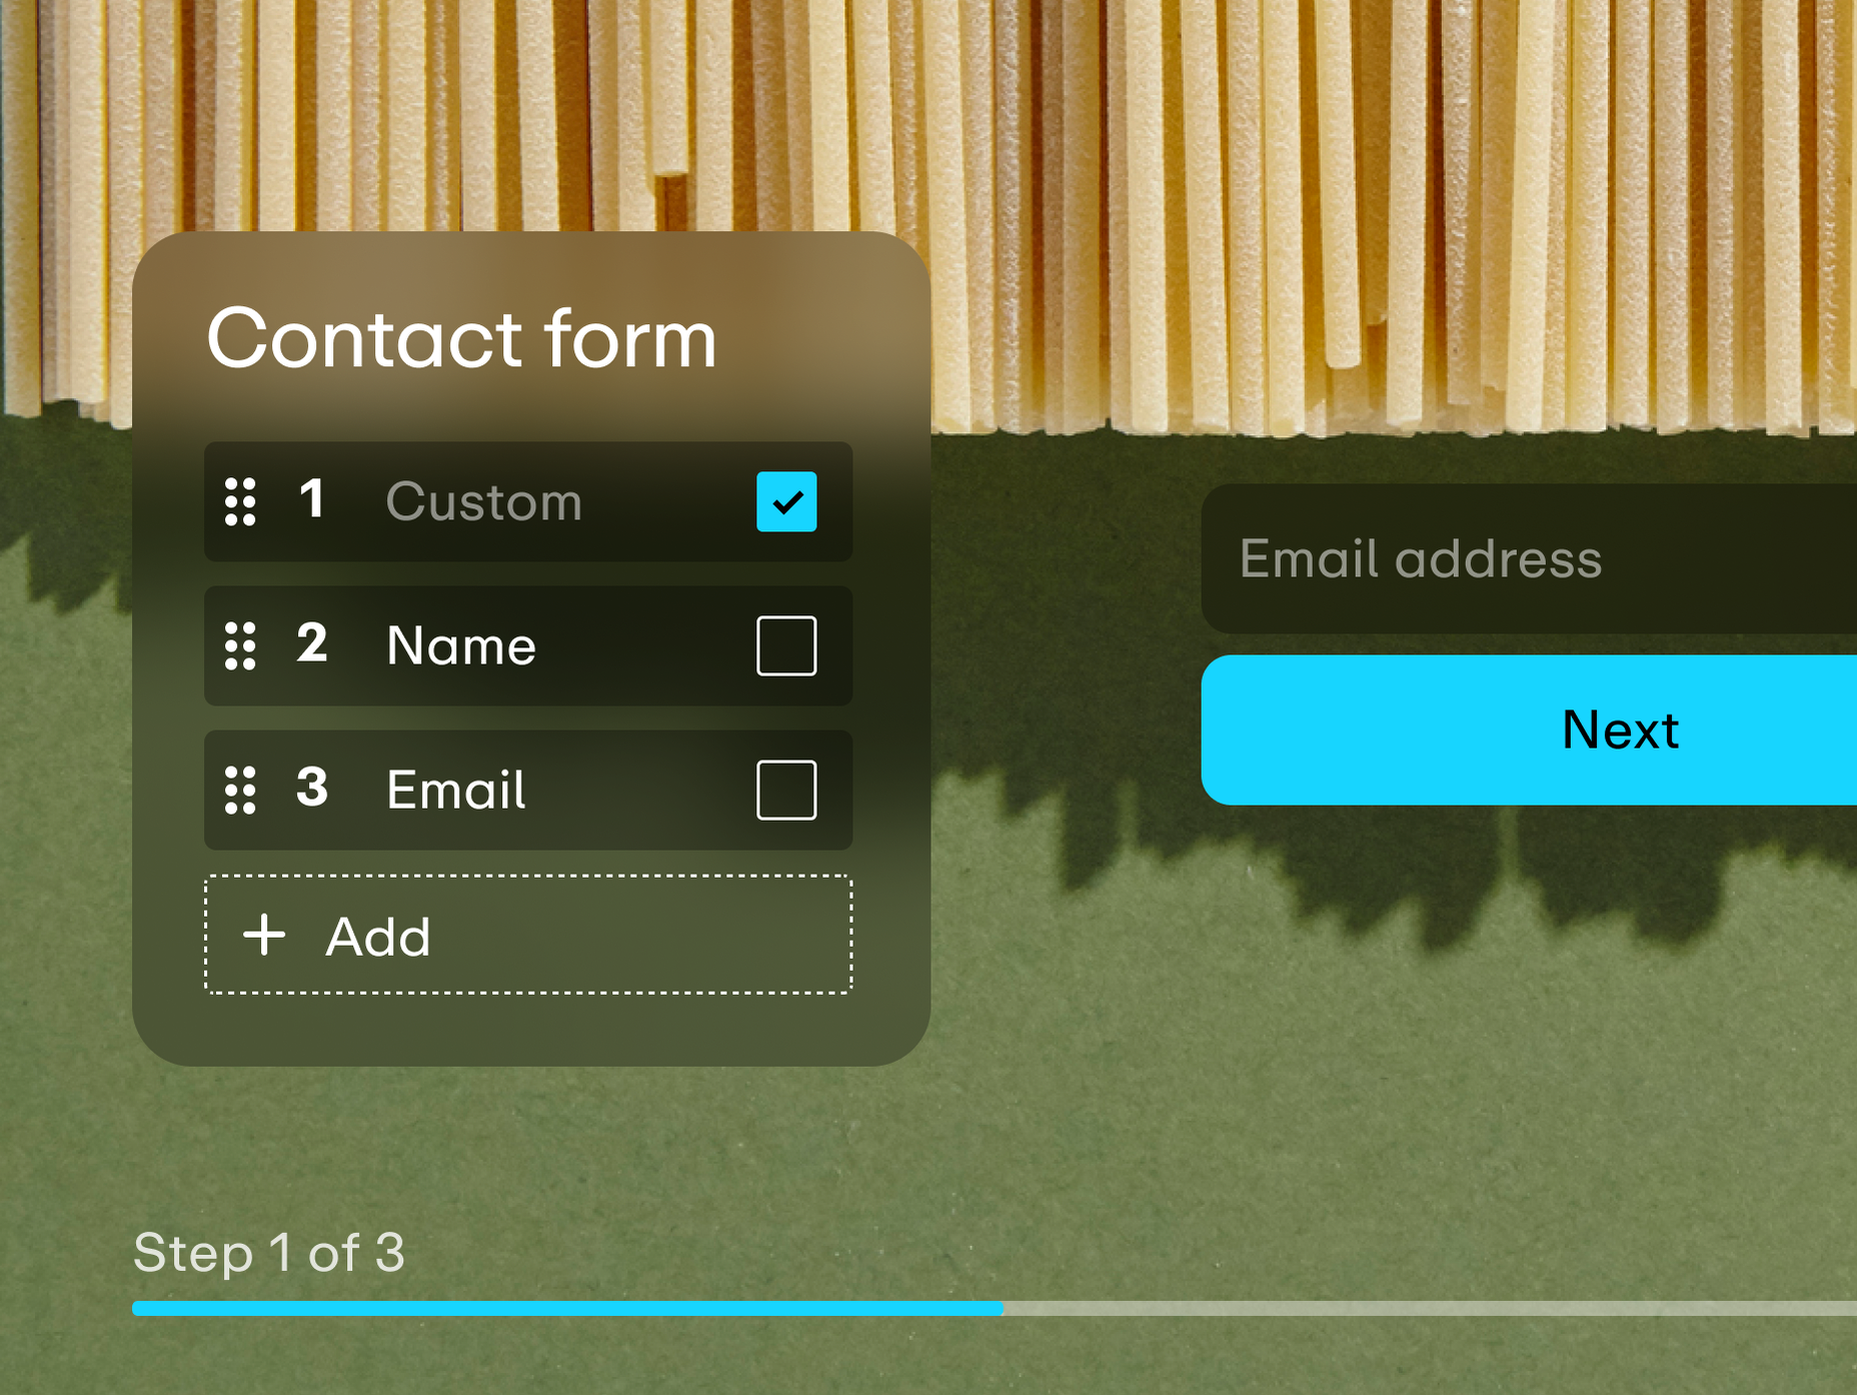 Creating a contact form to capture emails and names